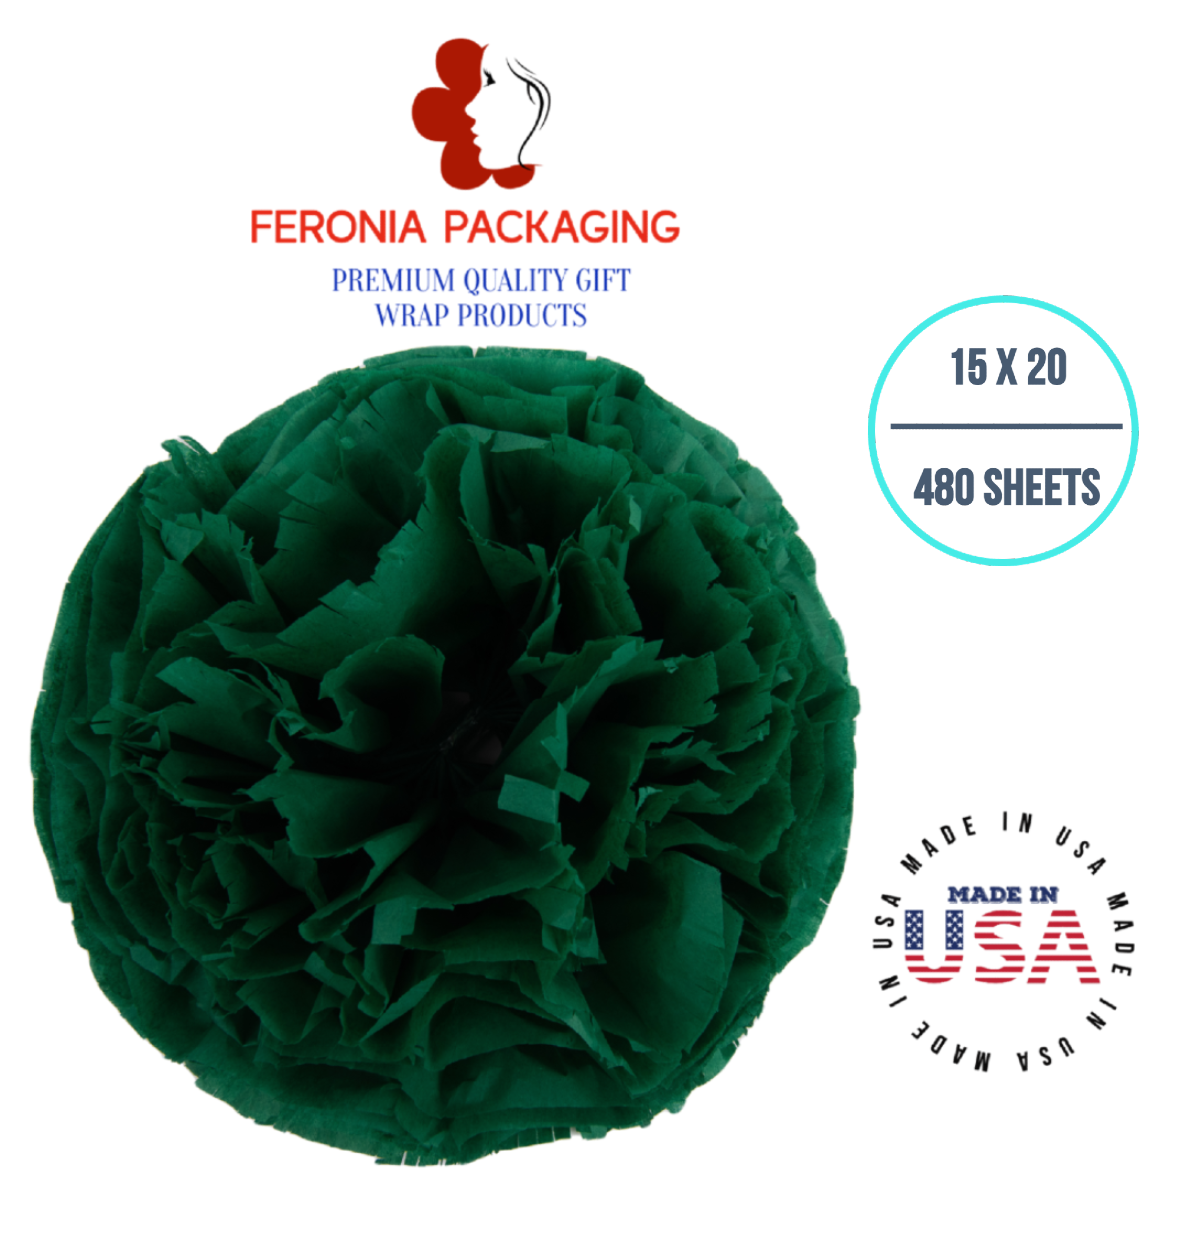 Emeralad Green Tissue Paper Squares, Bulk 480 Sheets, Premium Gift Wrap and Art Supplies for Birthdays, Holidays, or Presents by Feronia packaging, Large 15 Inch x 20 Inch